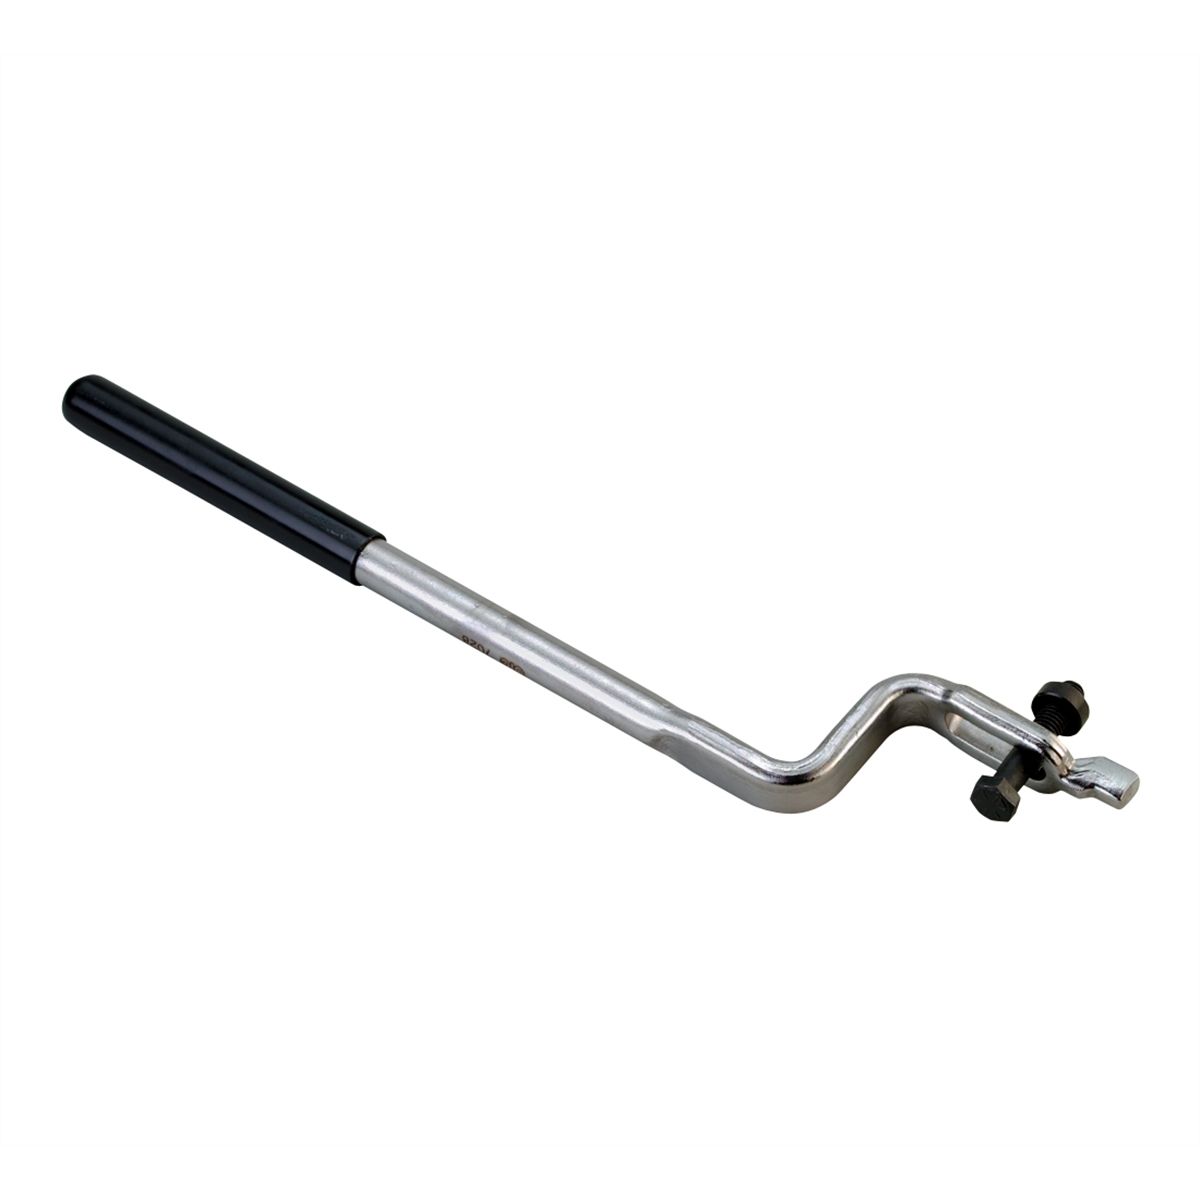 Clutch Adjusting Wrench for SpicerÂ® Clutches